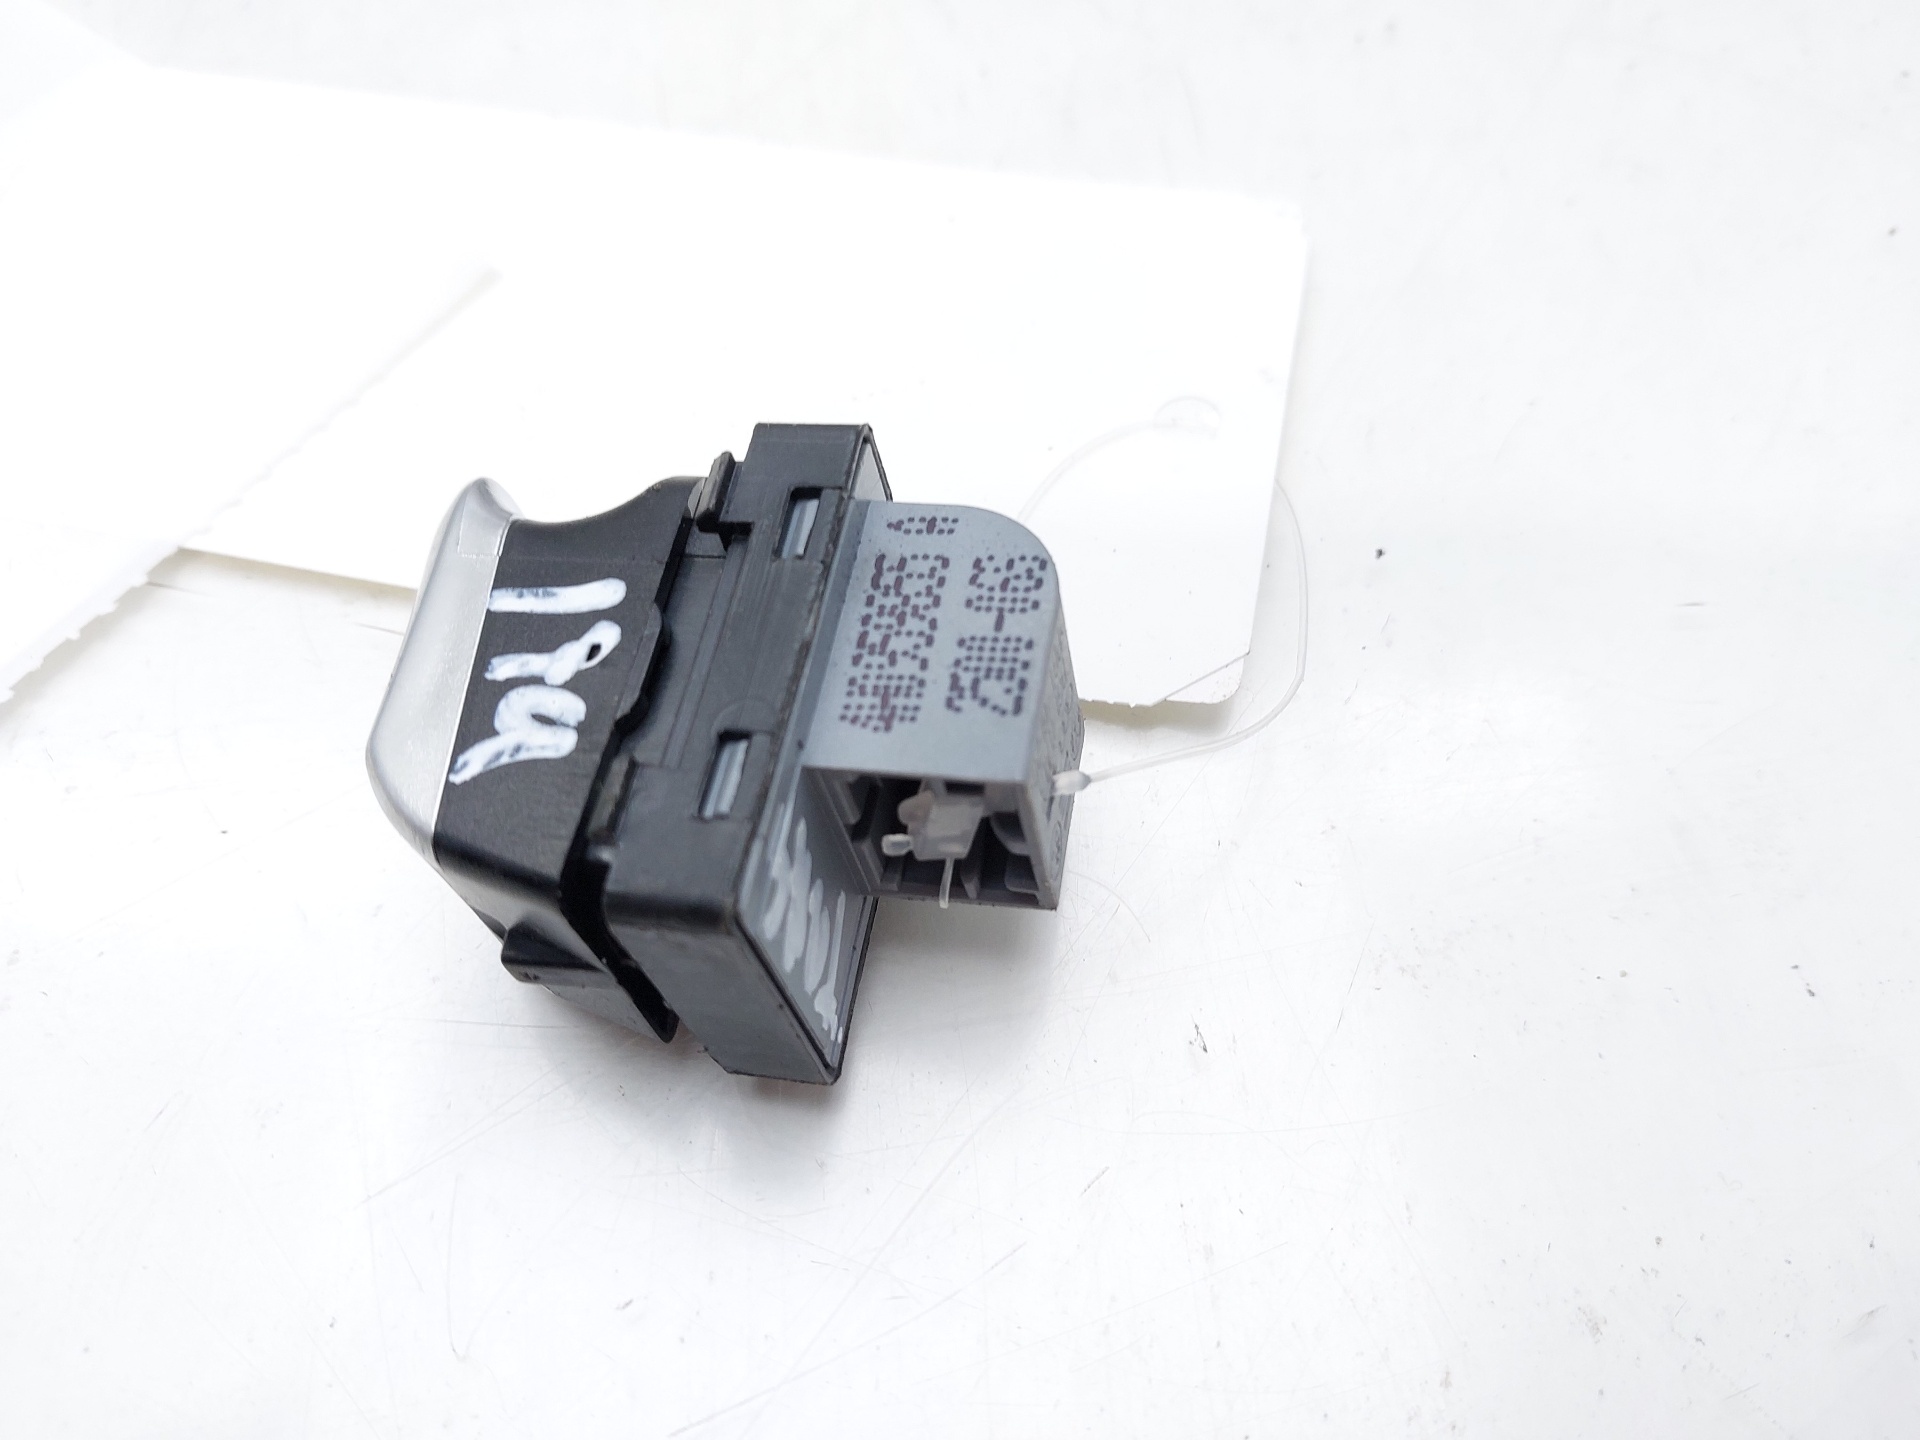 AUDI A7 C7/4G (2010-2020) Rear Right Door Window Control Switch 4H0959855A 22330580